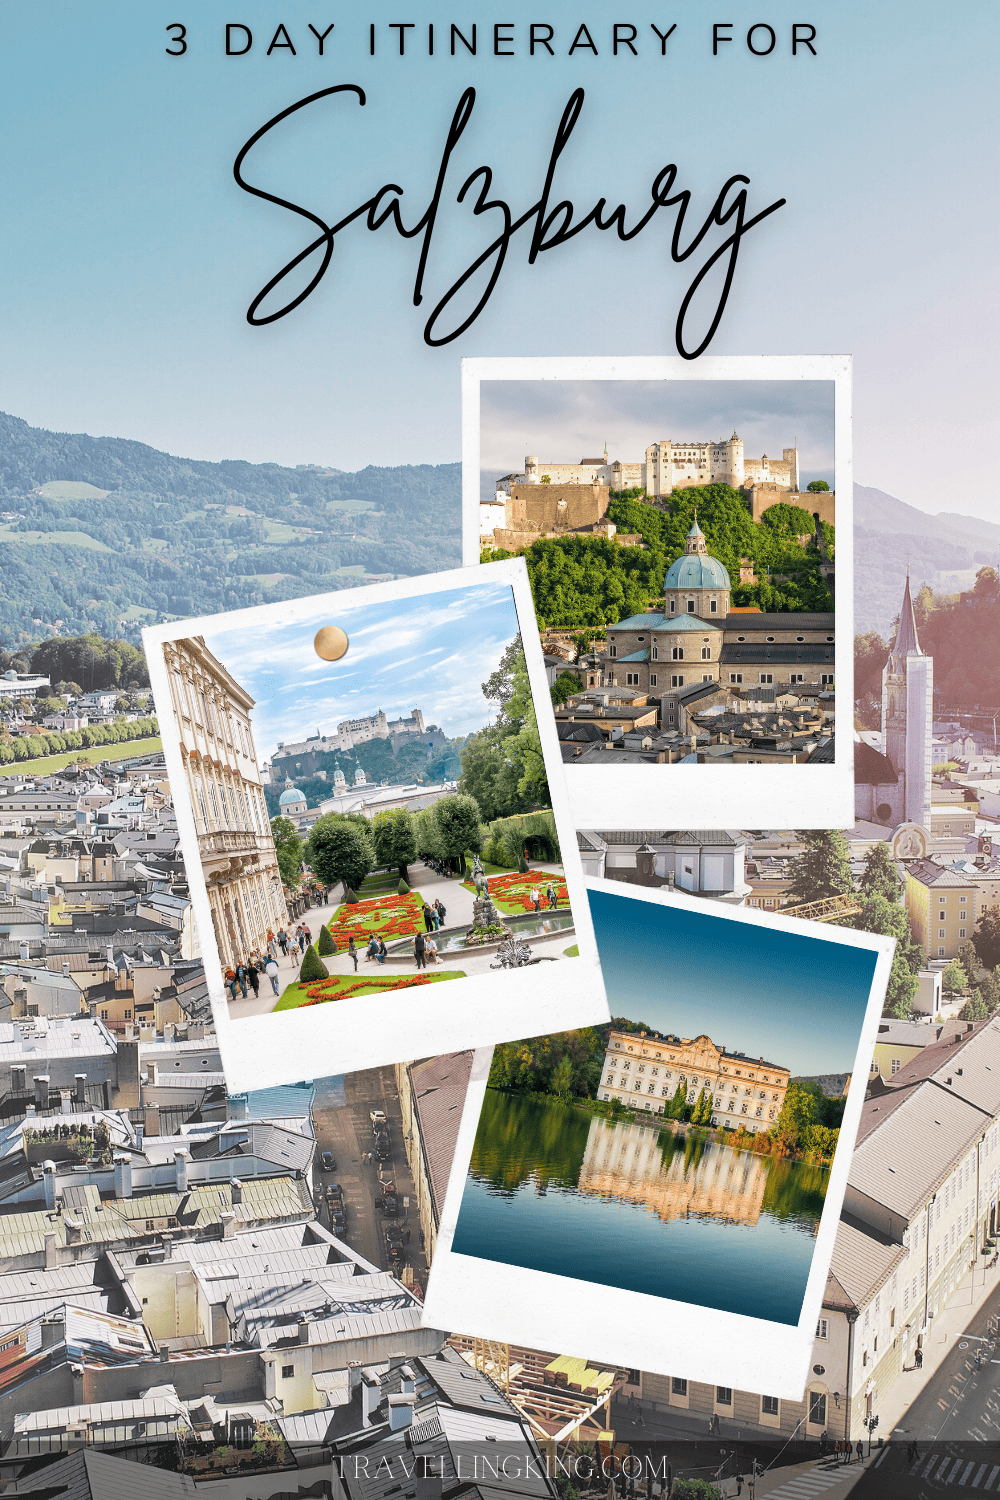 3 Day Itinerary for Salzburg